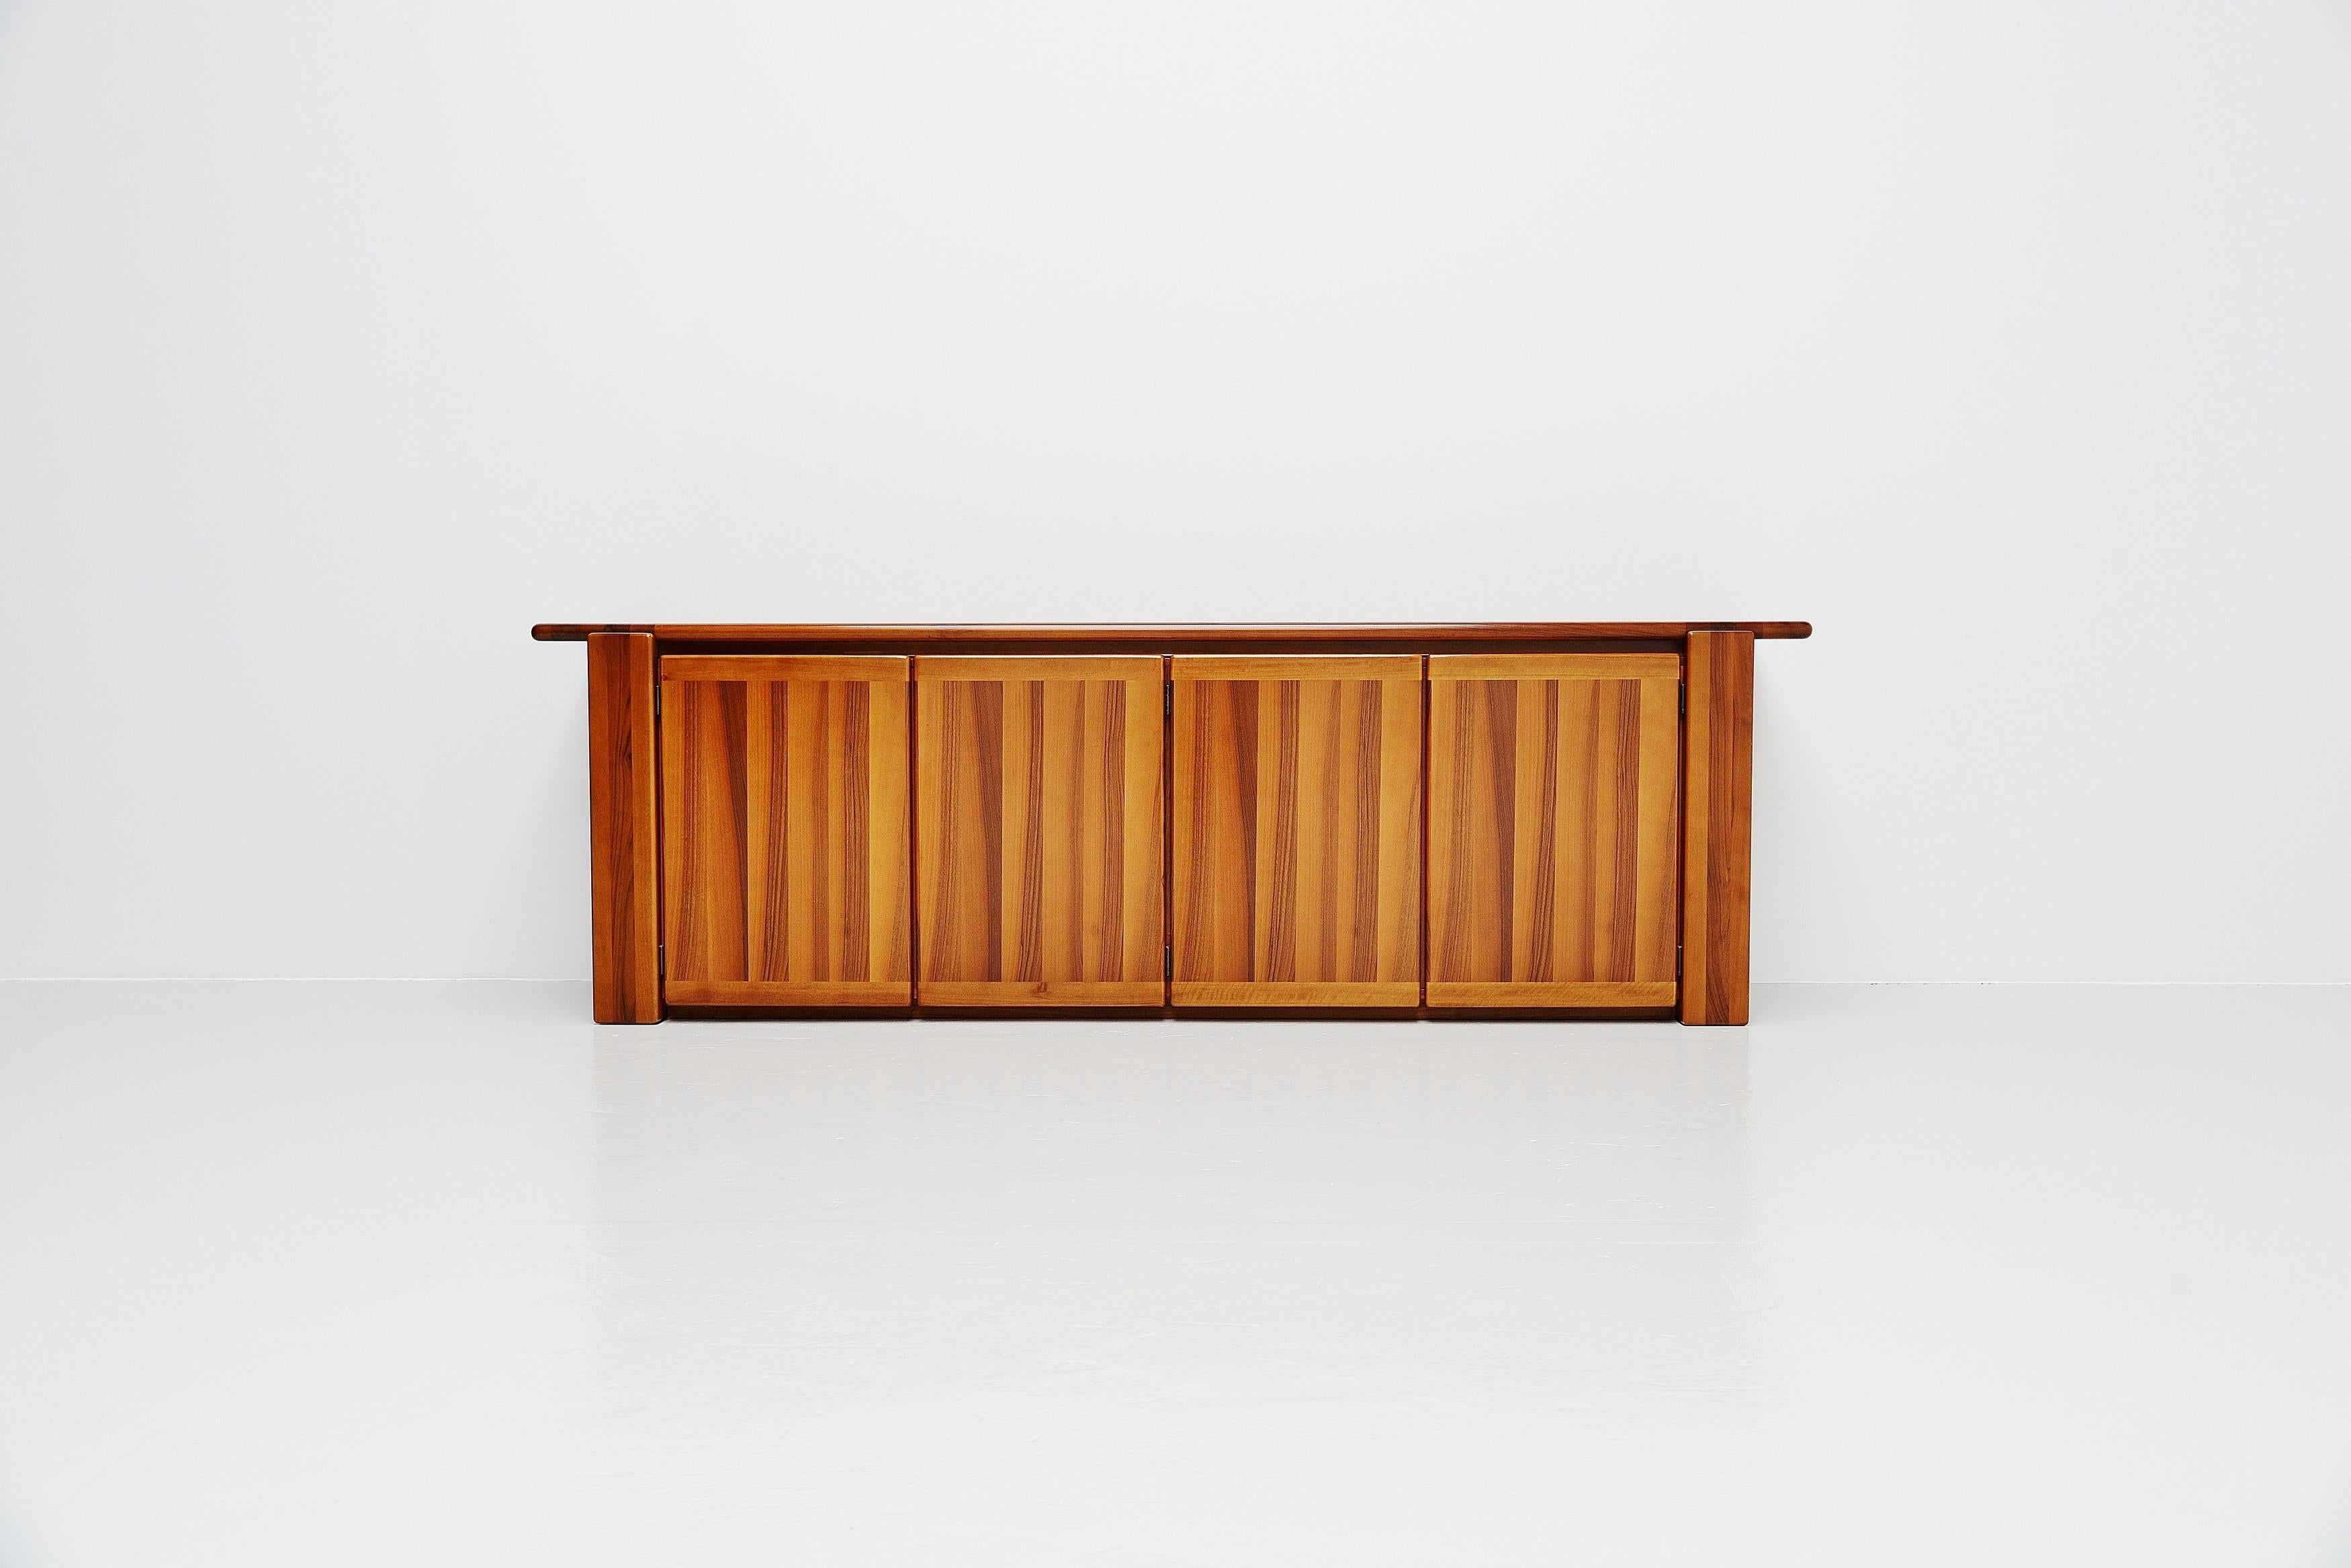 Geometric layered large 'Saporro' credenza designed by Mario Marenco and manufactured by Mobilgirgi, Italy, 1978. This credenza is made of stunning grained walnut veneer and solid walnut parts. The credenza has a geometric look because of the